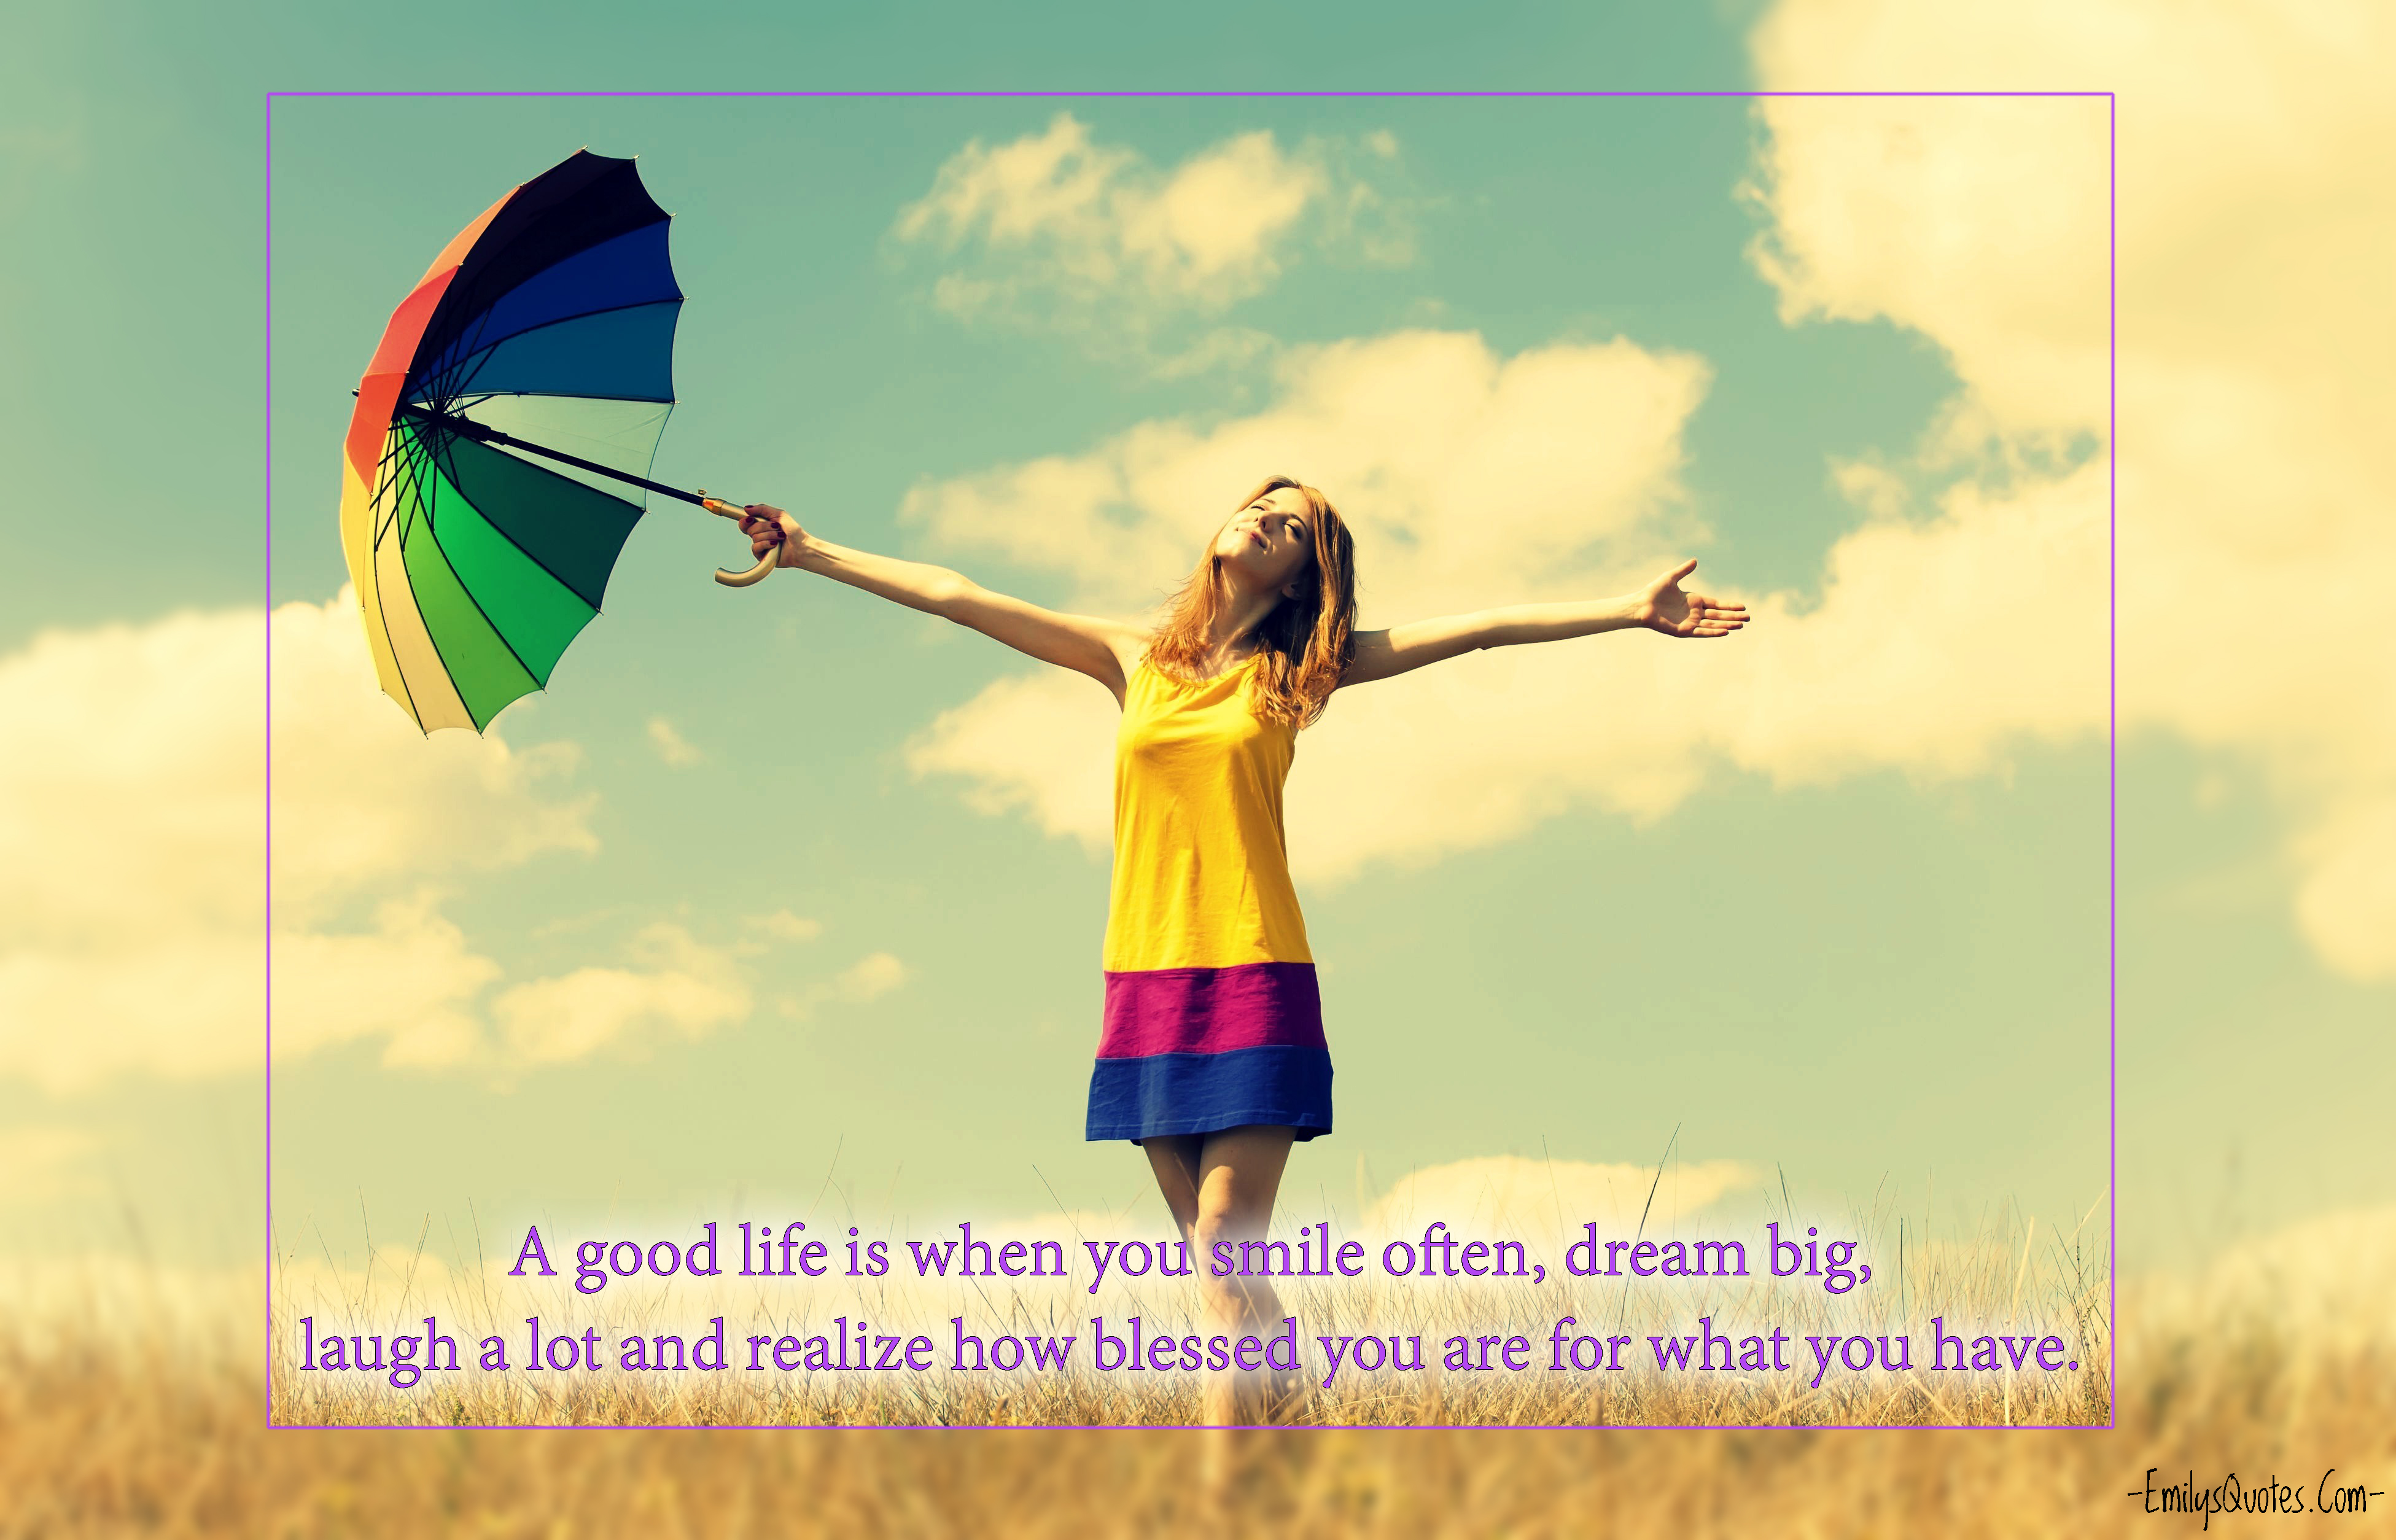 A good life is when you smile often, dream big, laugh a lot and realize how blessed you are for what you have